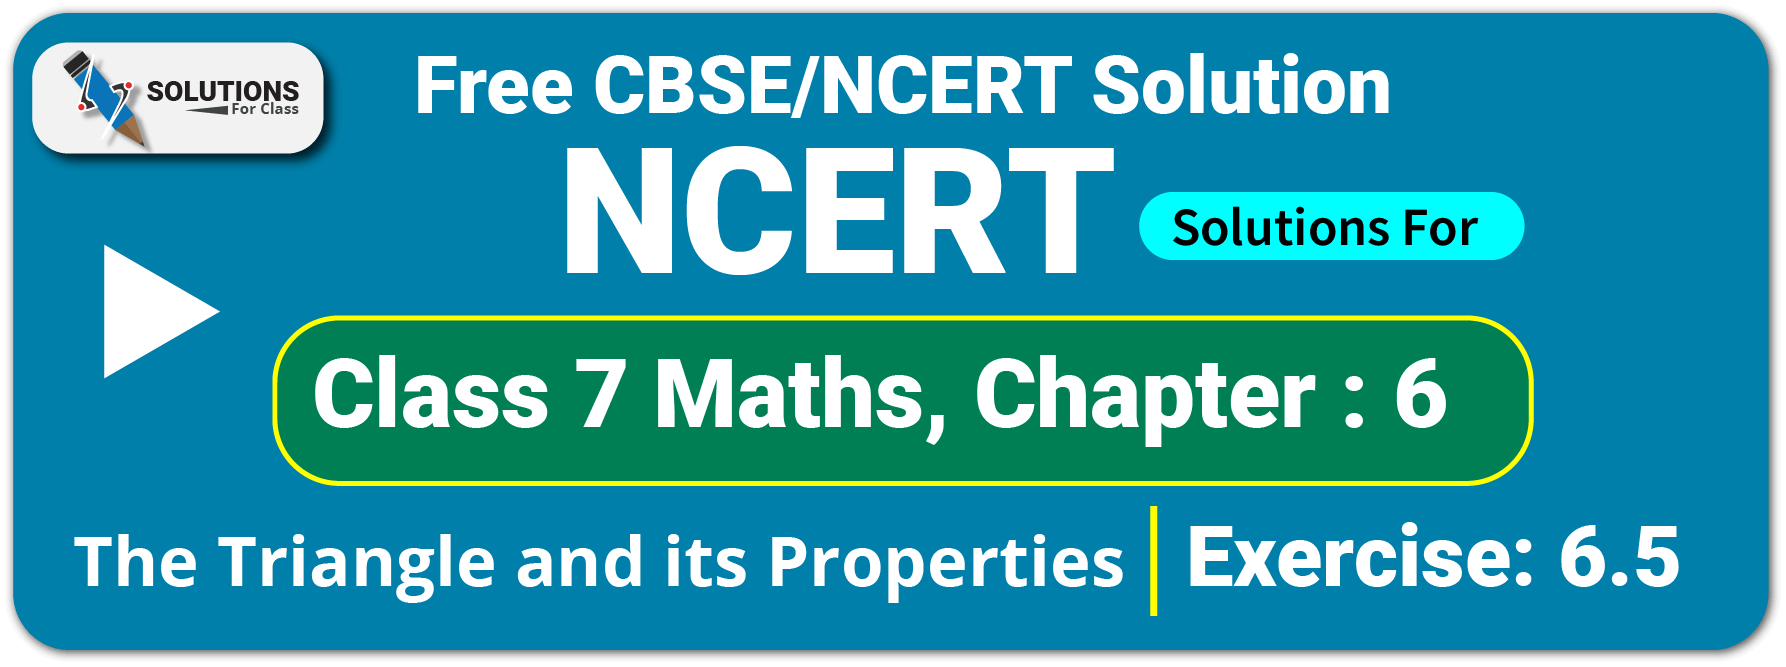 NCERT Solutions Class 7 Maths Chapter 6 The Triangle and its Properties Exe.6.5